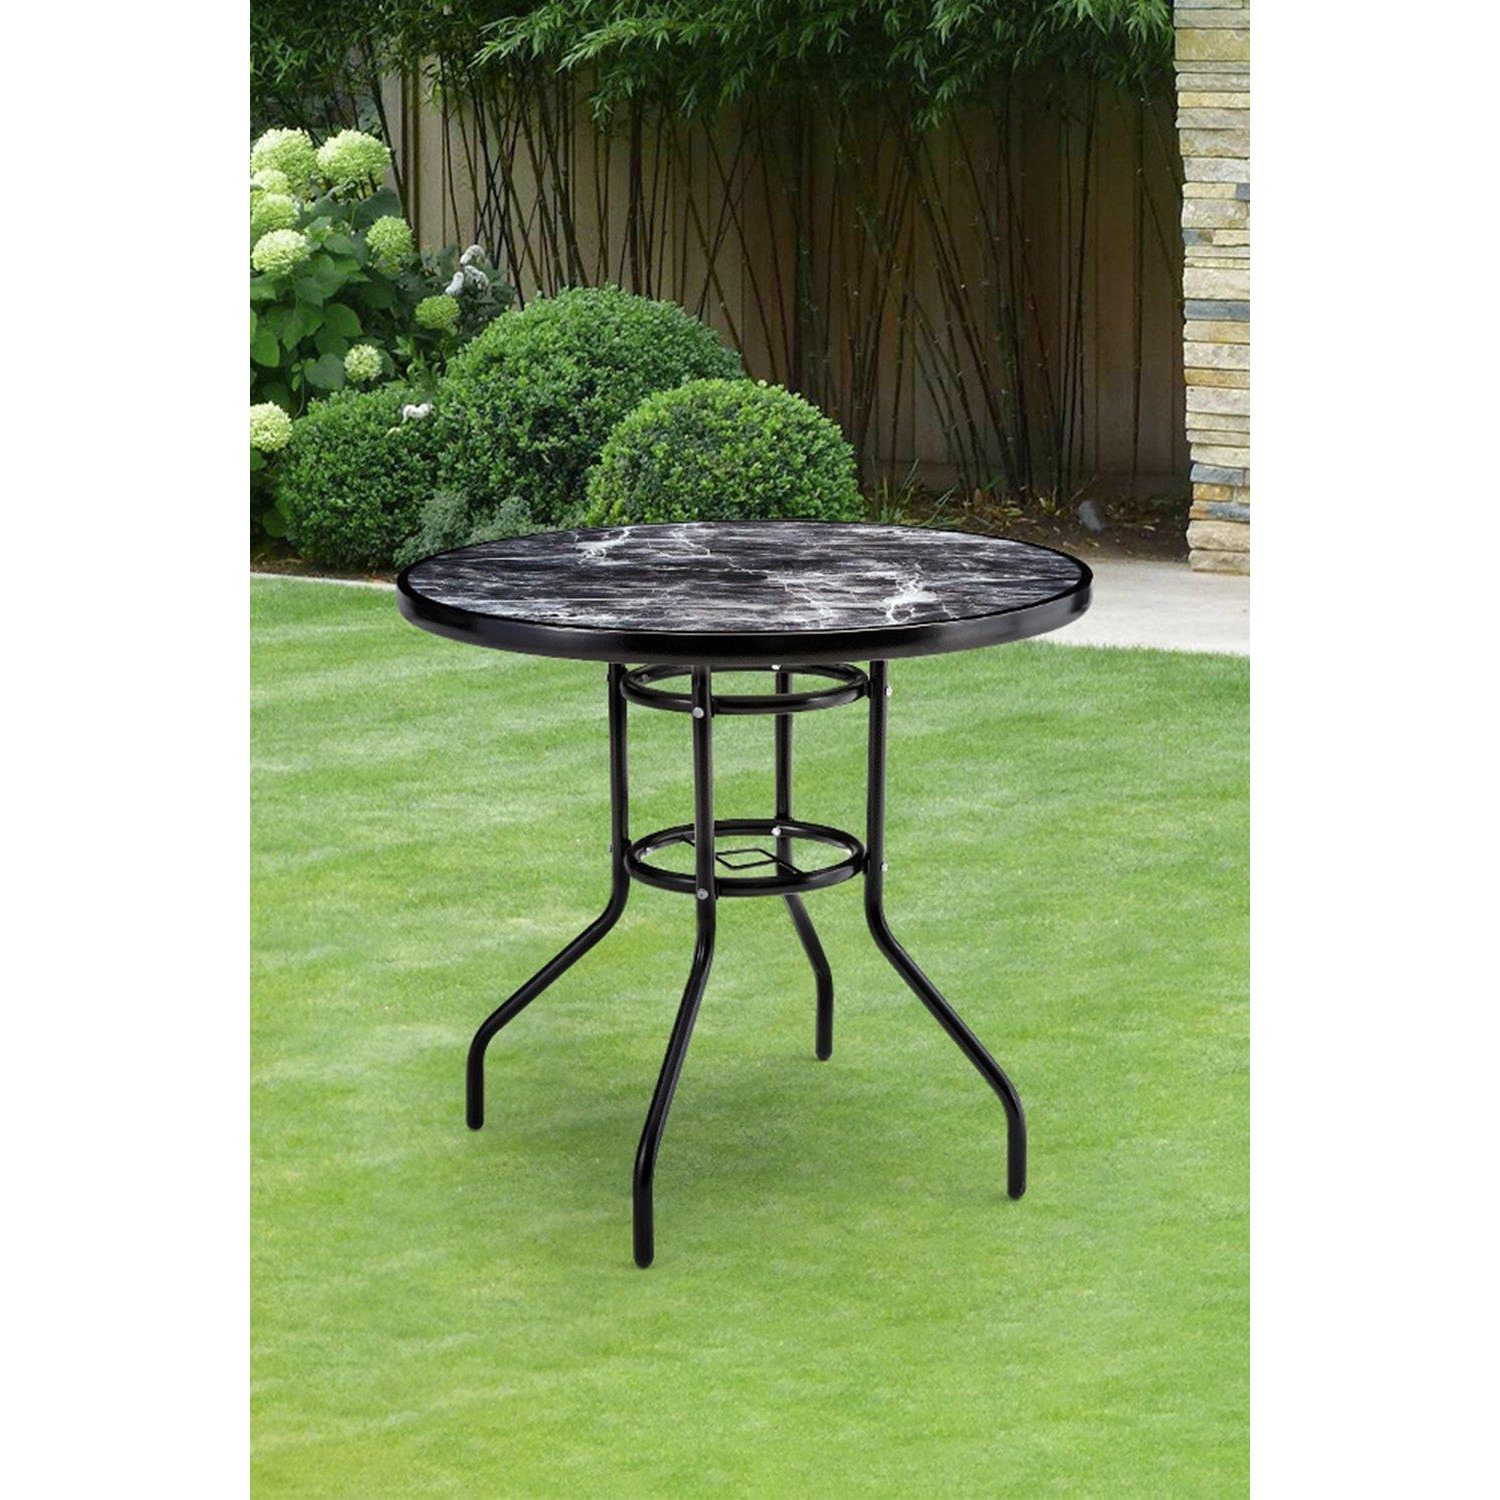 Garden Round Tempered Glass Marble Coffee Table - image 1